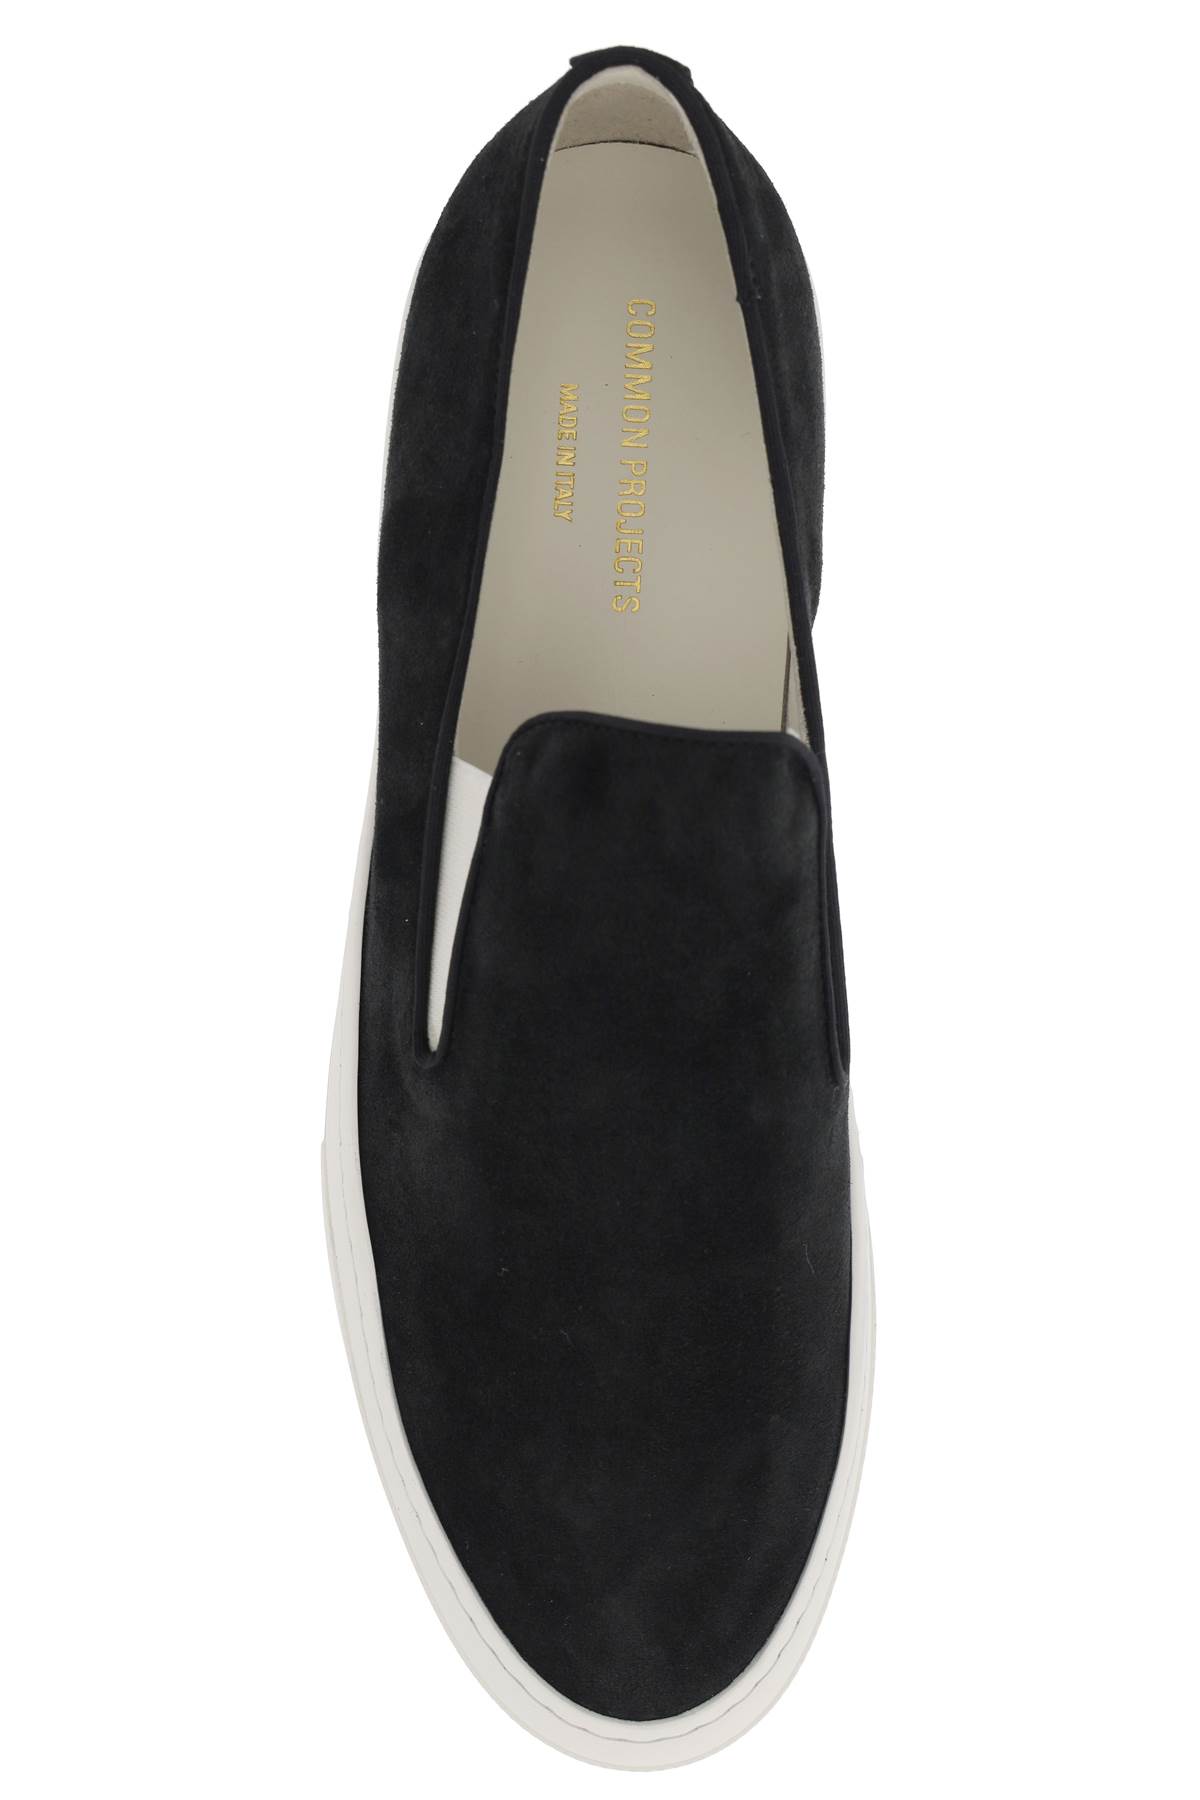 Shop Common Projects Slip-on Sneakers In Black (black)